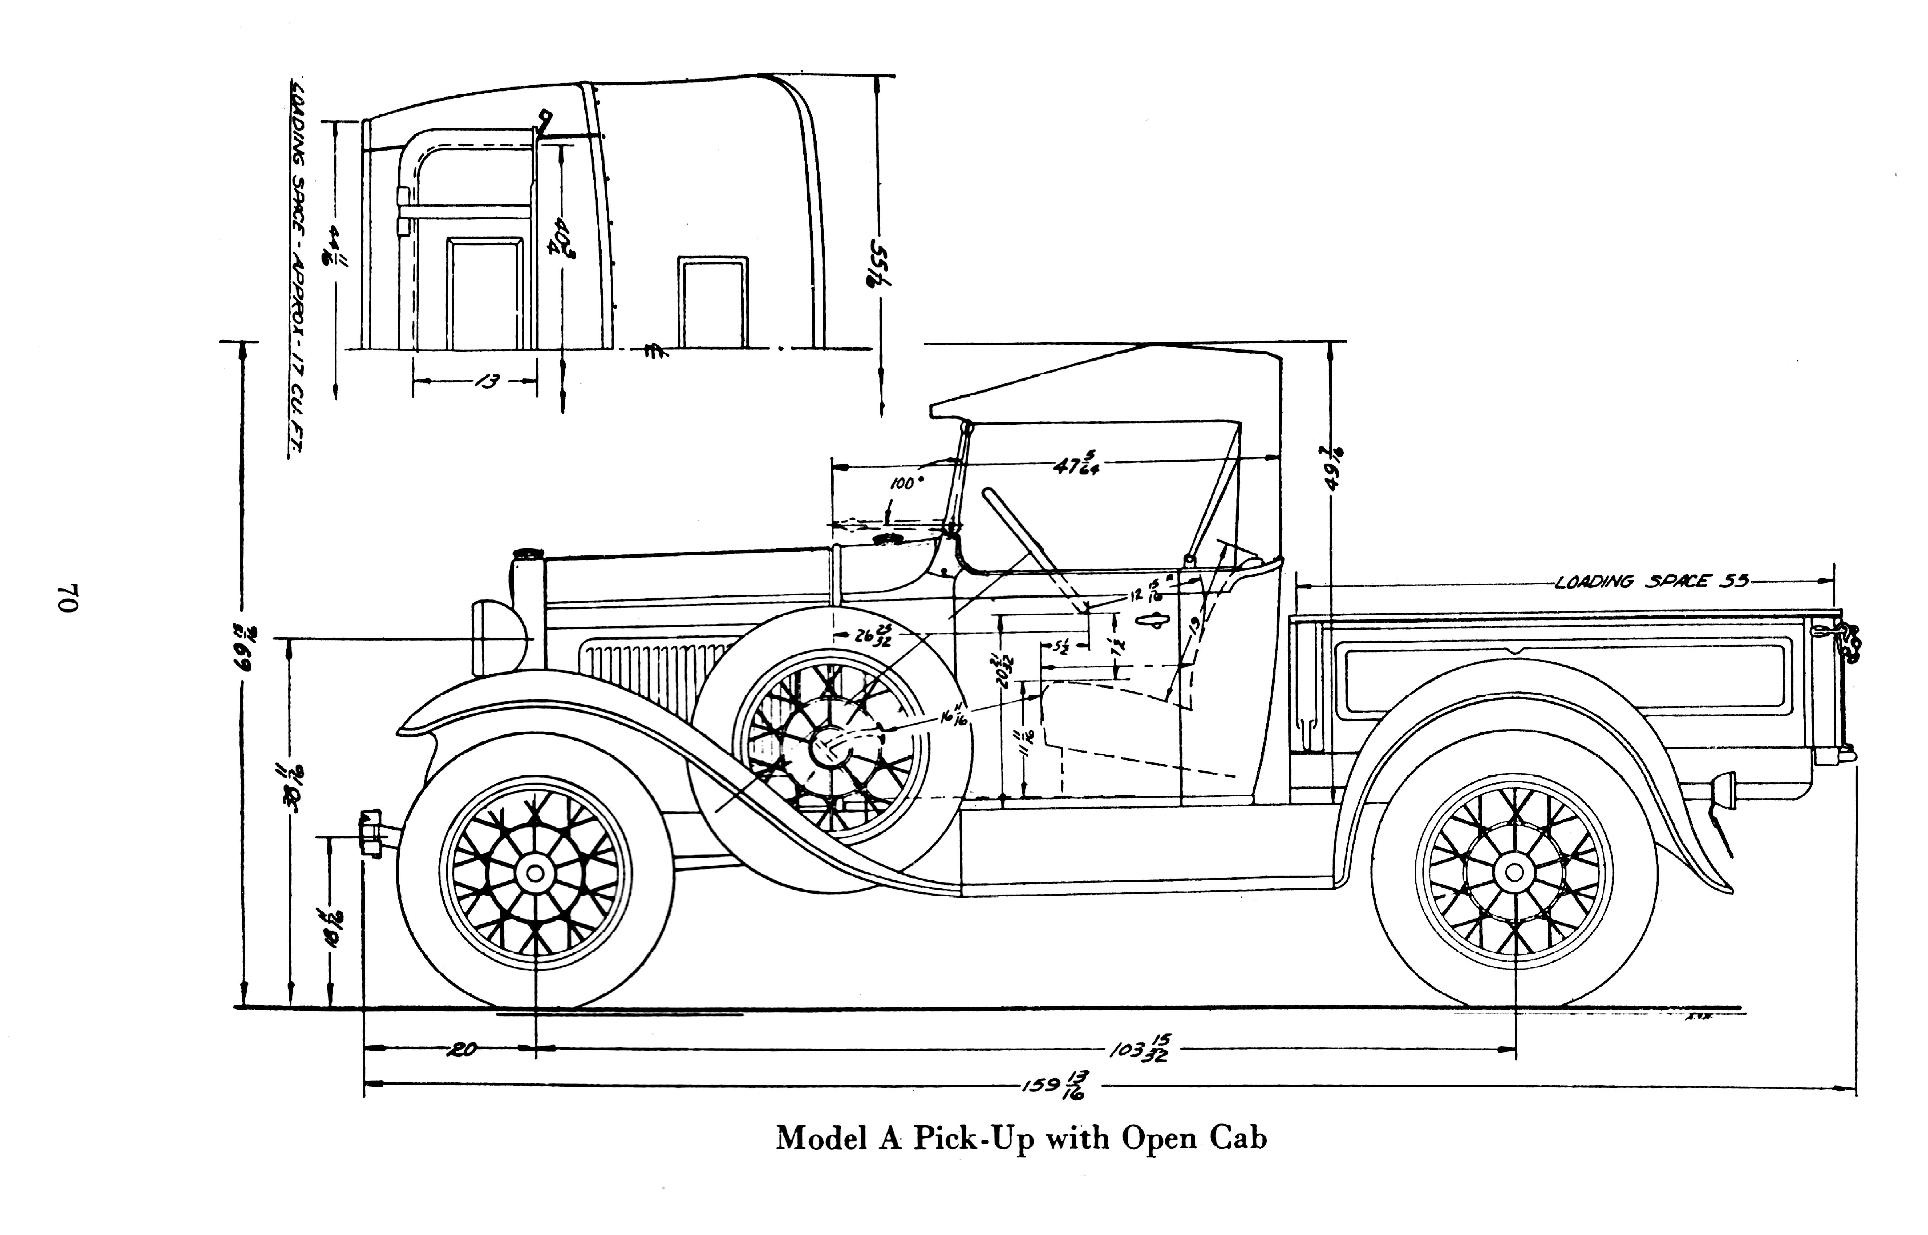 1931 Ford model a truck dimensions #7